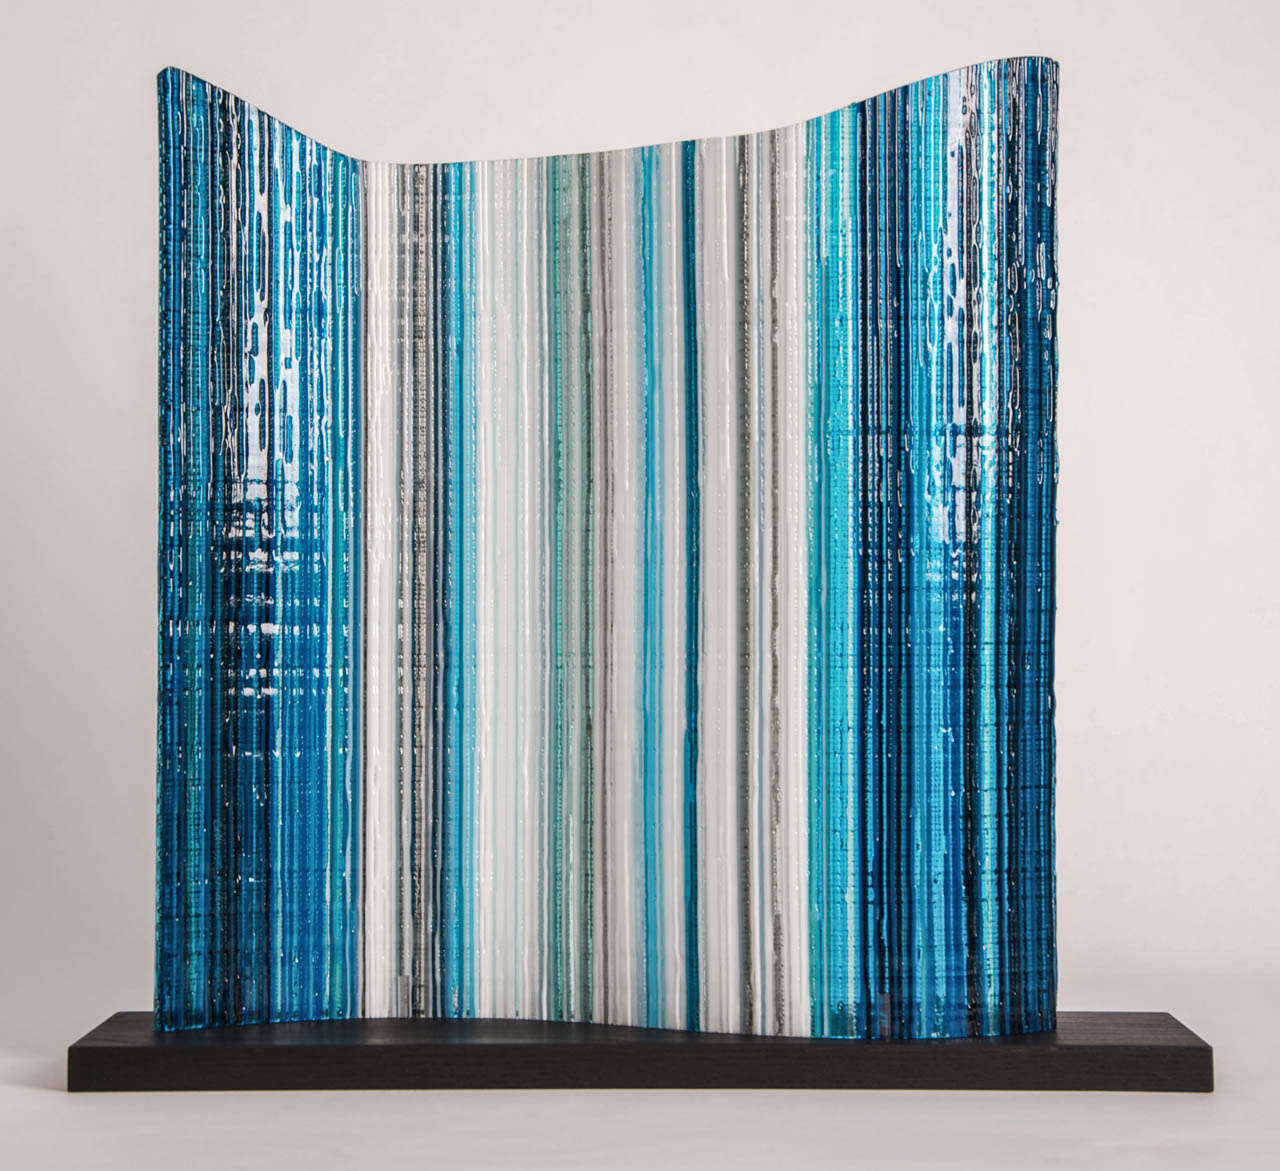 Cathryn Shilling experiments with colour and technique to produce beautiful one off sculptures. Her innovative pieces push the glass beyond our usual comfort zones. Glass rods are stacked and woven together like fabric, mimicking the flexibility and